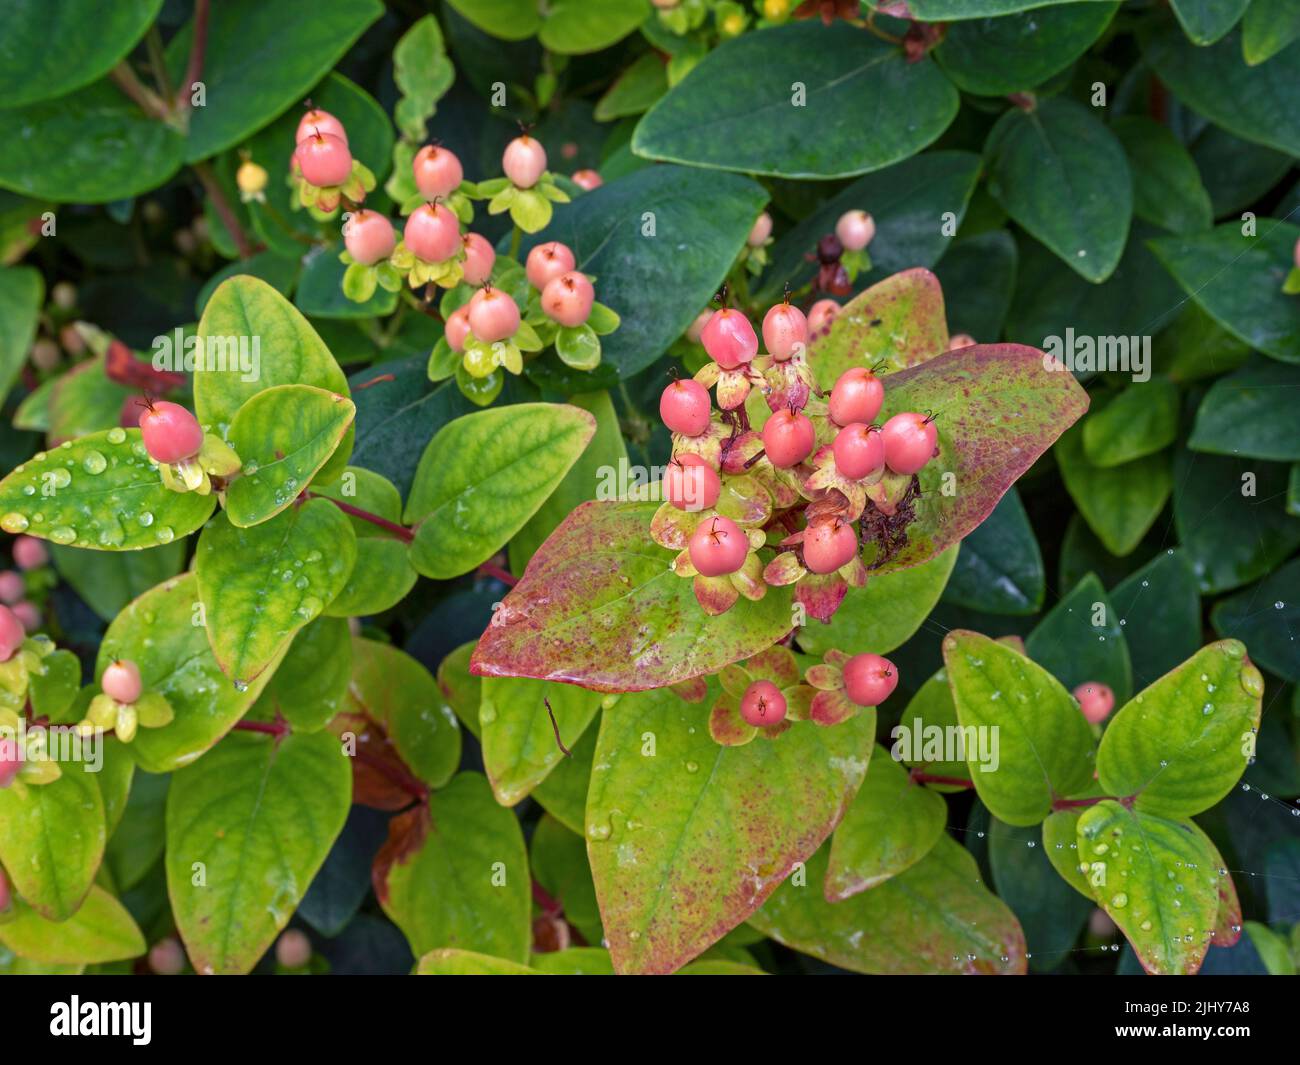 Tutsan plant with berries and green leaves Stock Photo